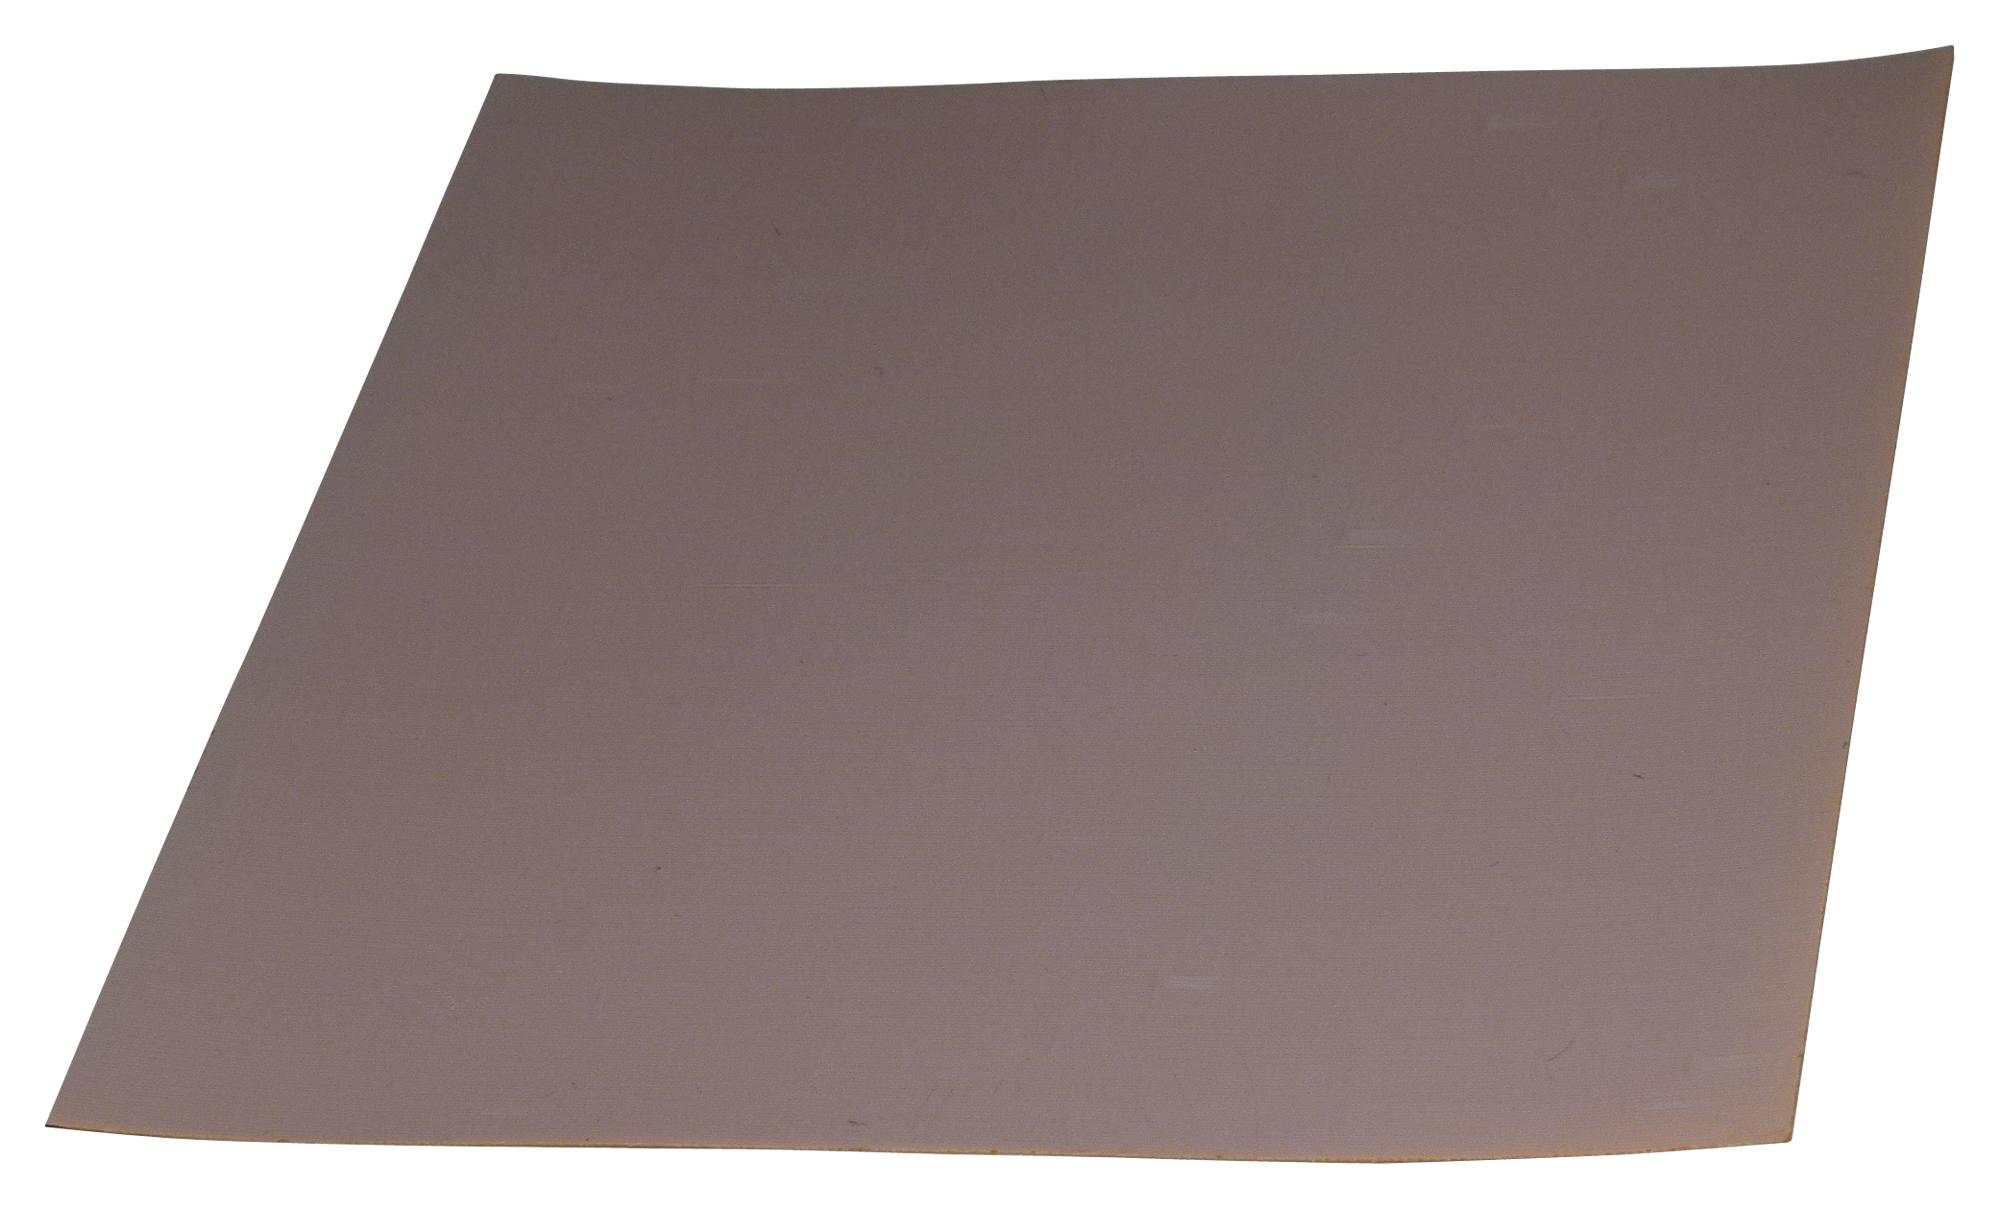 A14692-31 THERMAL INSULATOR PAD, 11" X 18", 6KV LAIRD